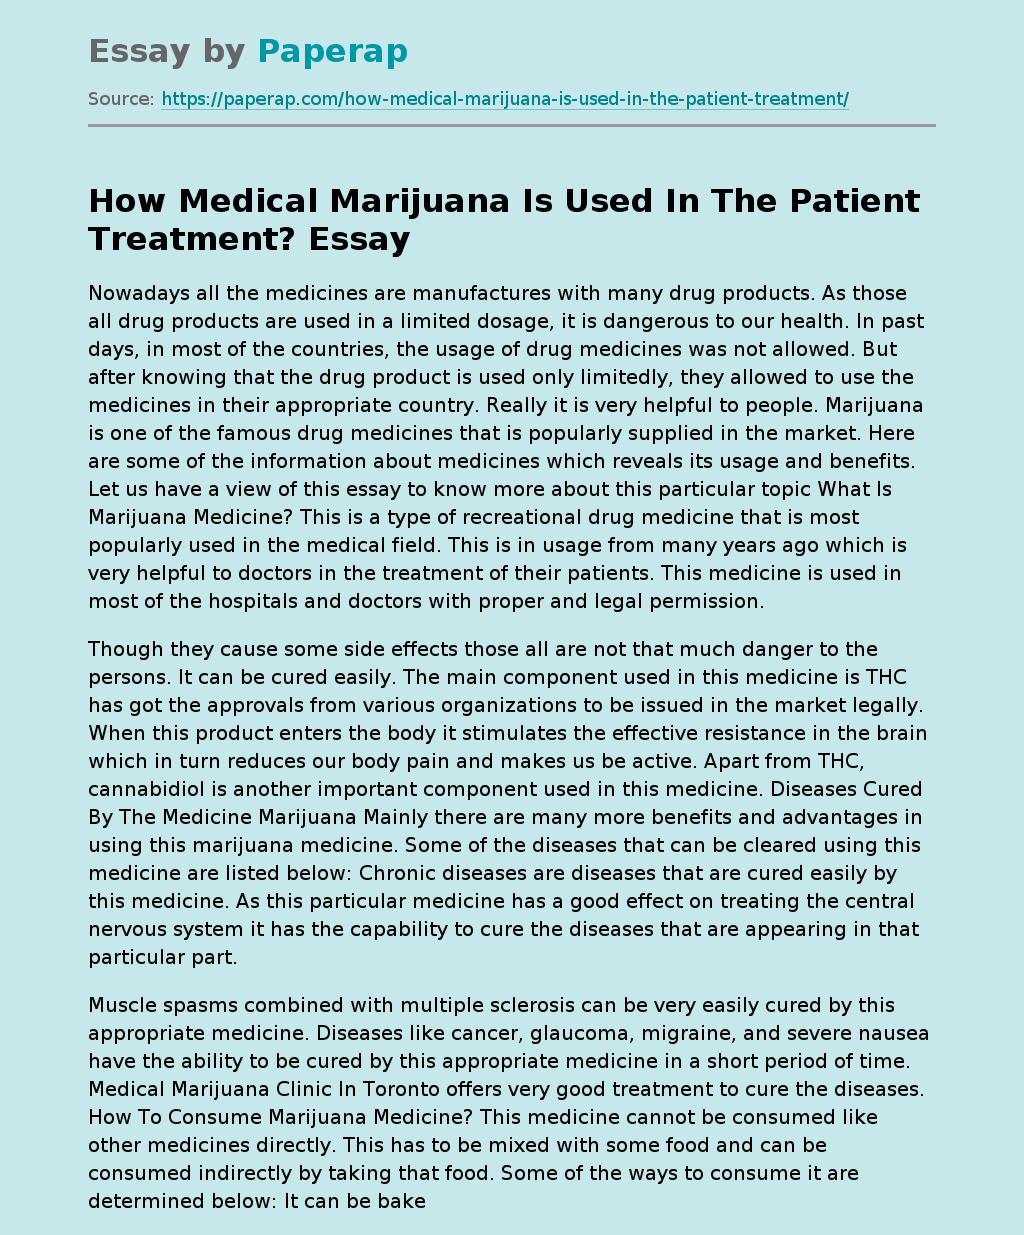 How Medical Marijuana Is Used In The Patient Treatment?